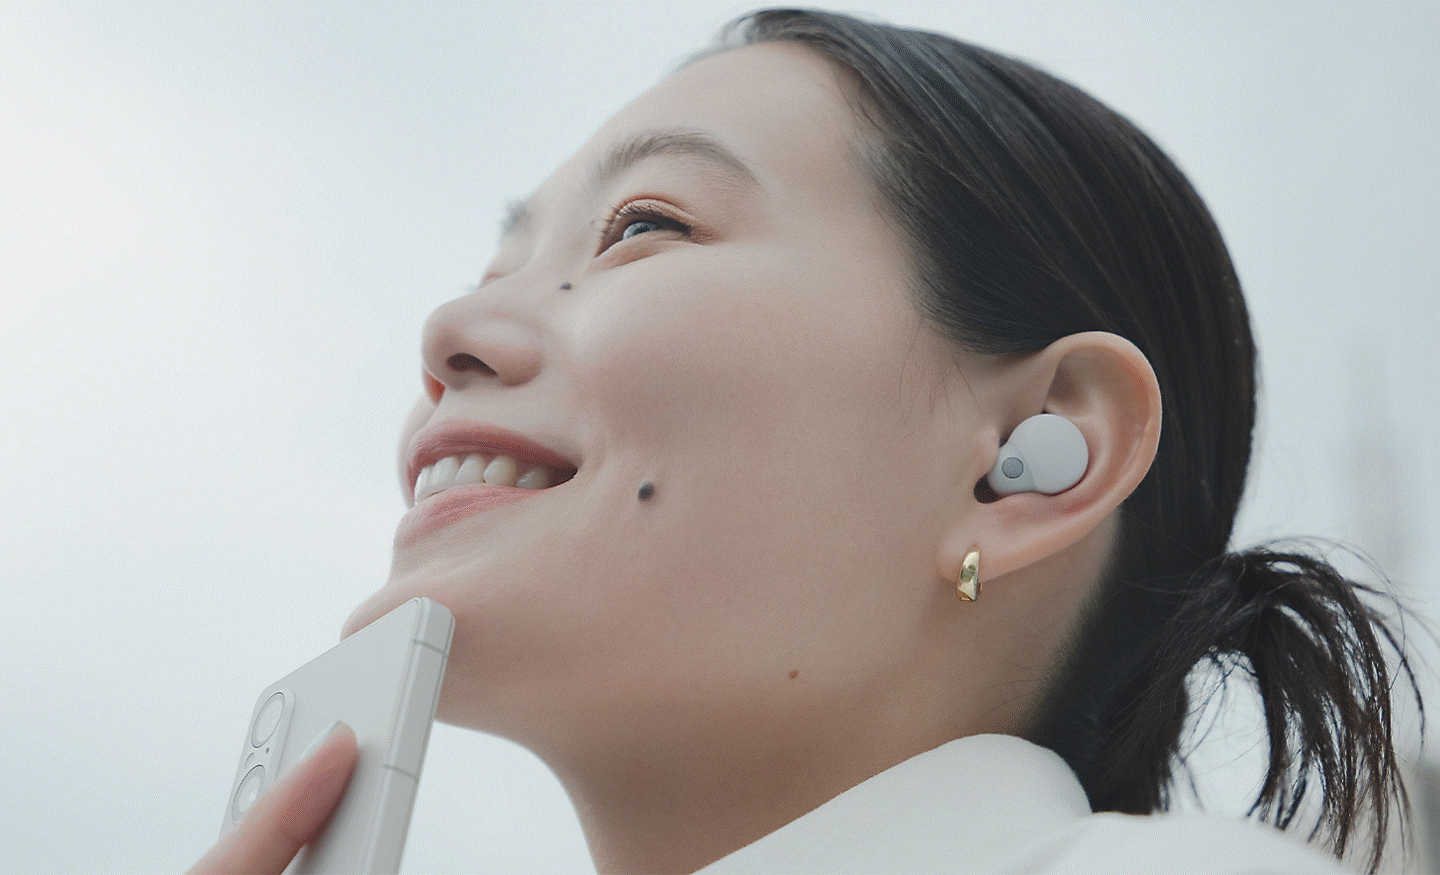 Close up image of a person listening to music on their phone via some in-ear headphones